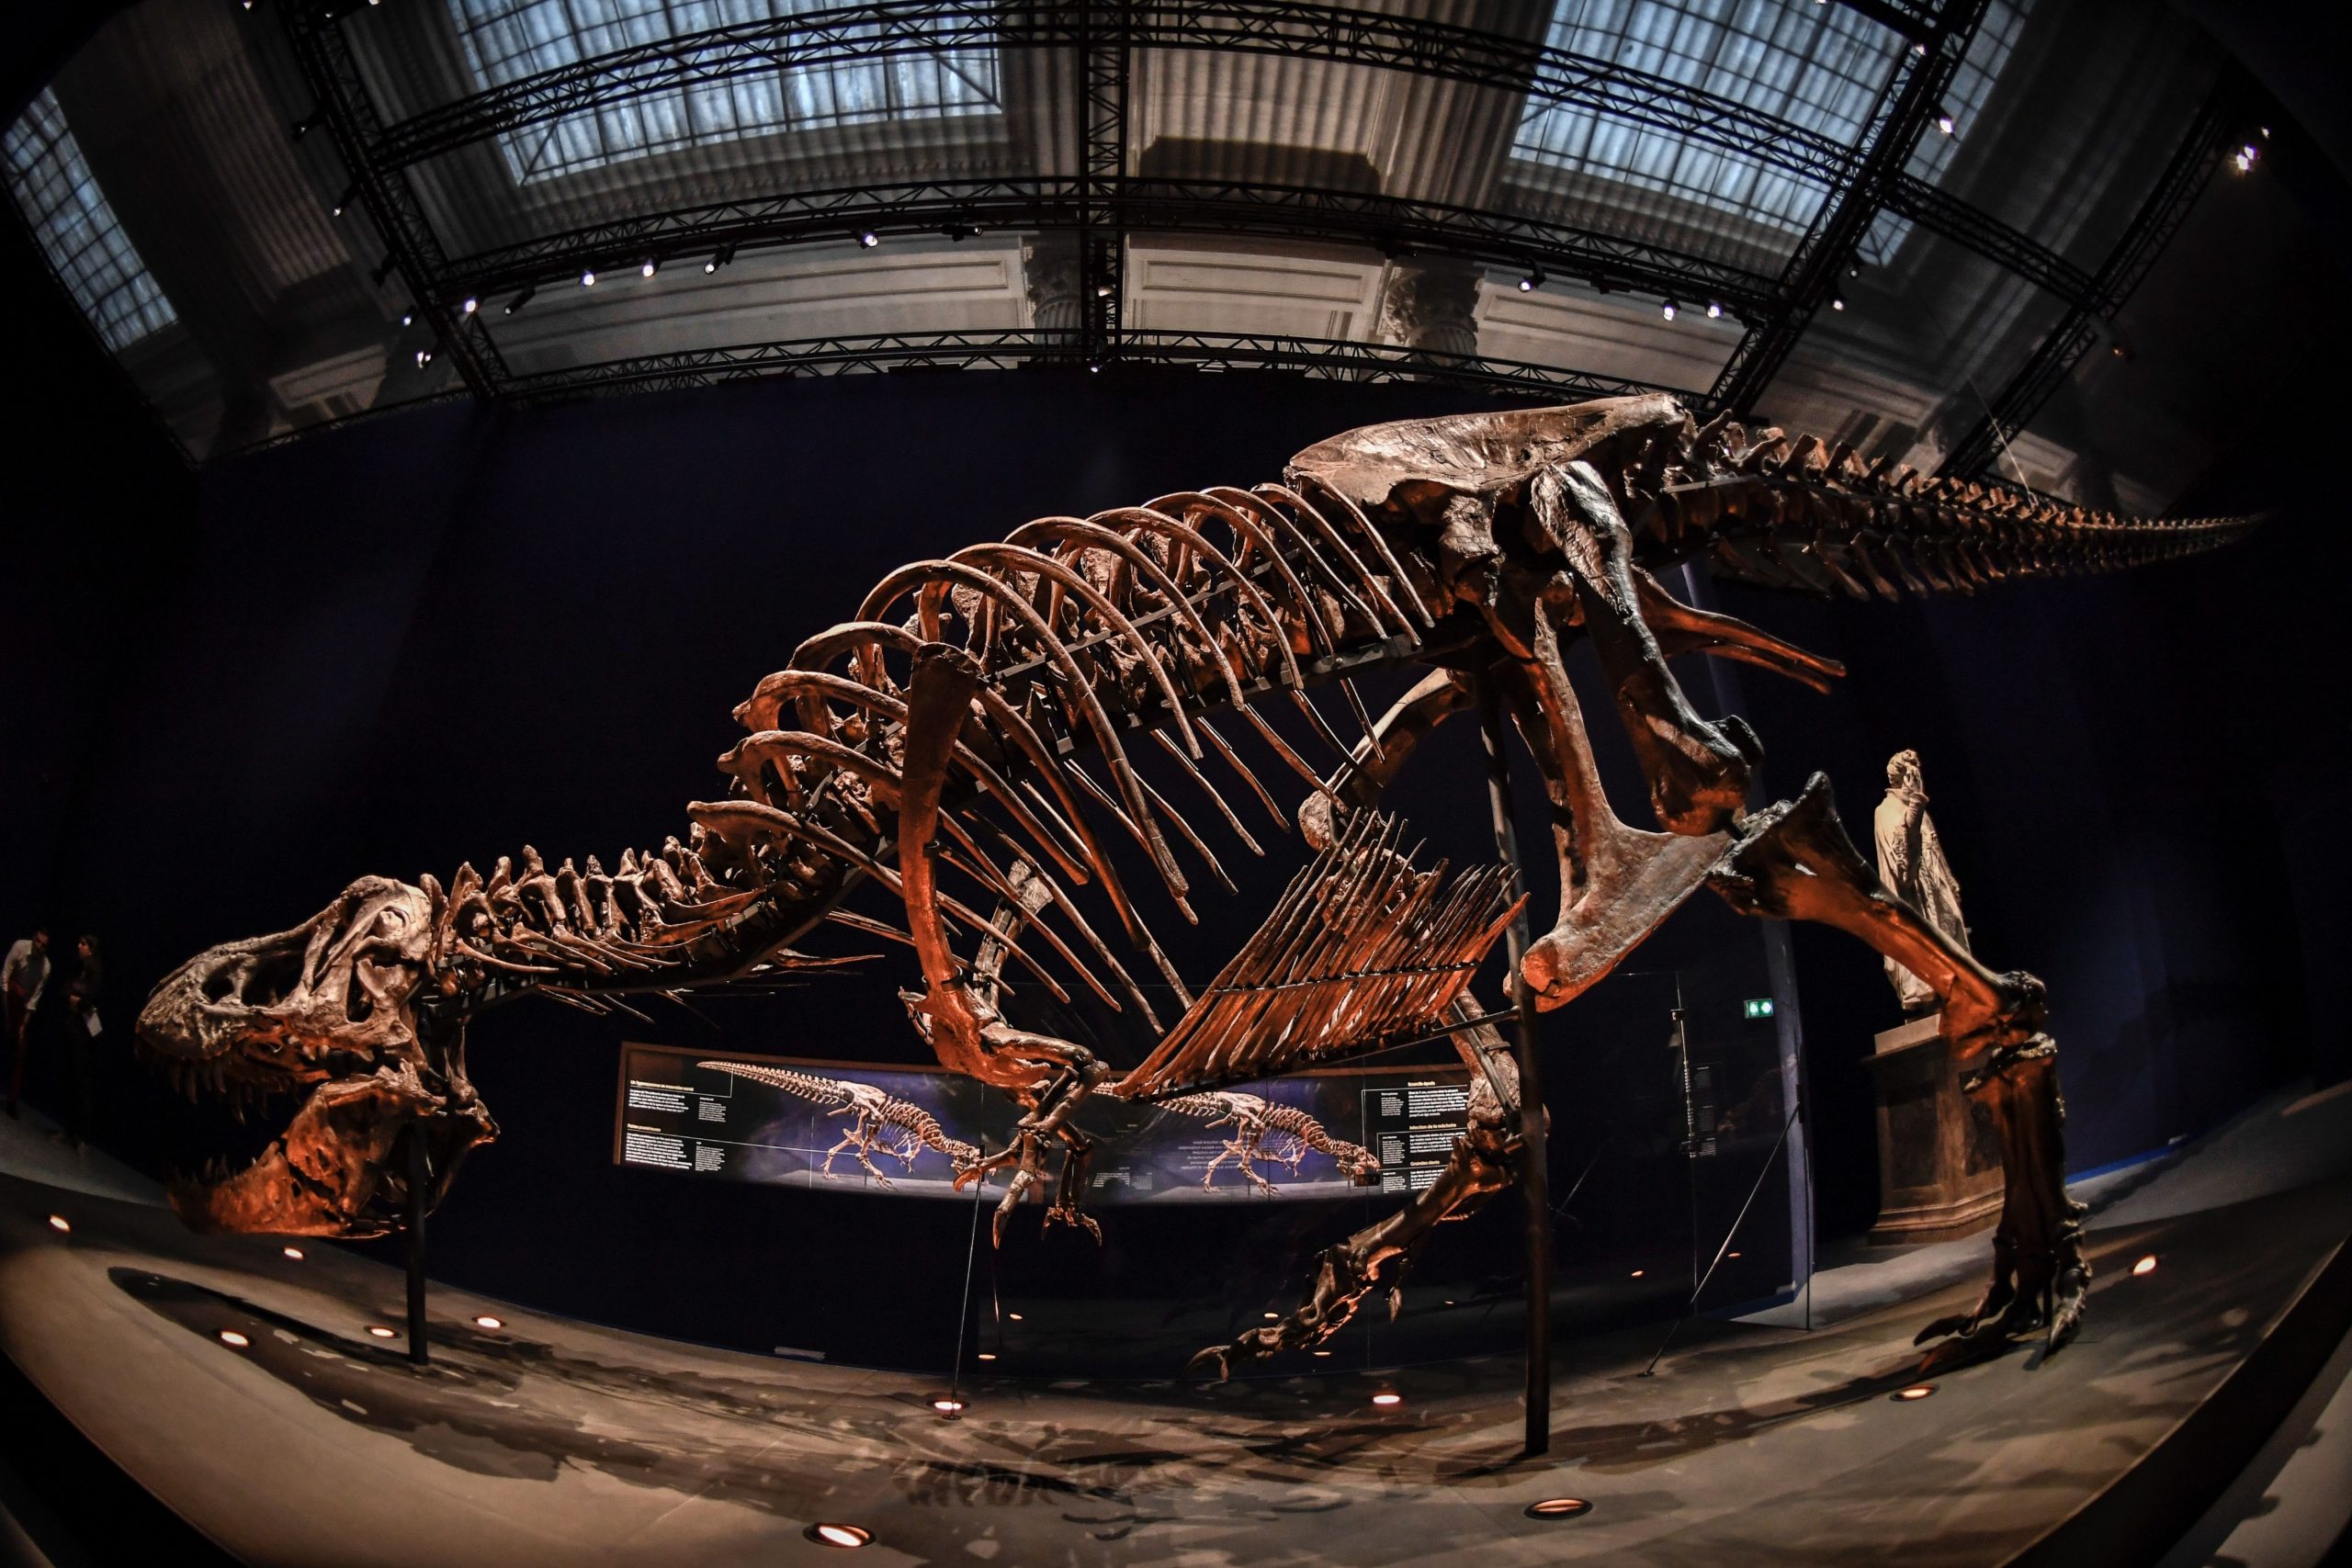 A T.rex on display in Paris in 2018. (Photo: STEPHANE DE SAKUTIN/AFP via Getty Images, Getty Images)